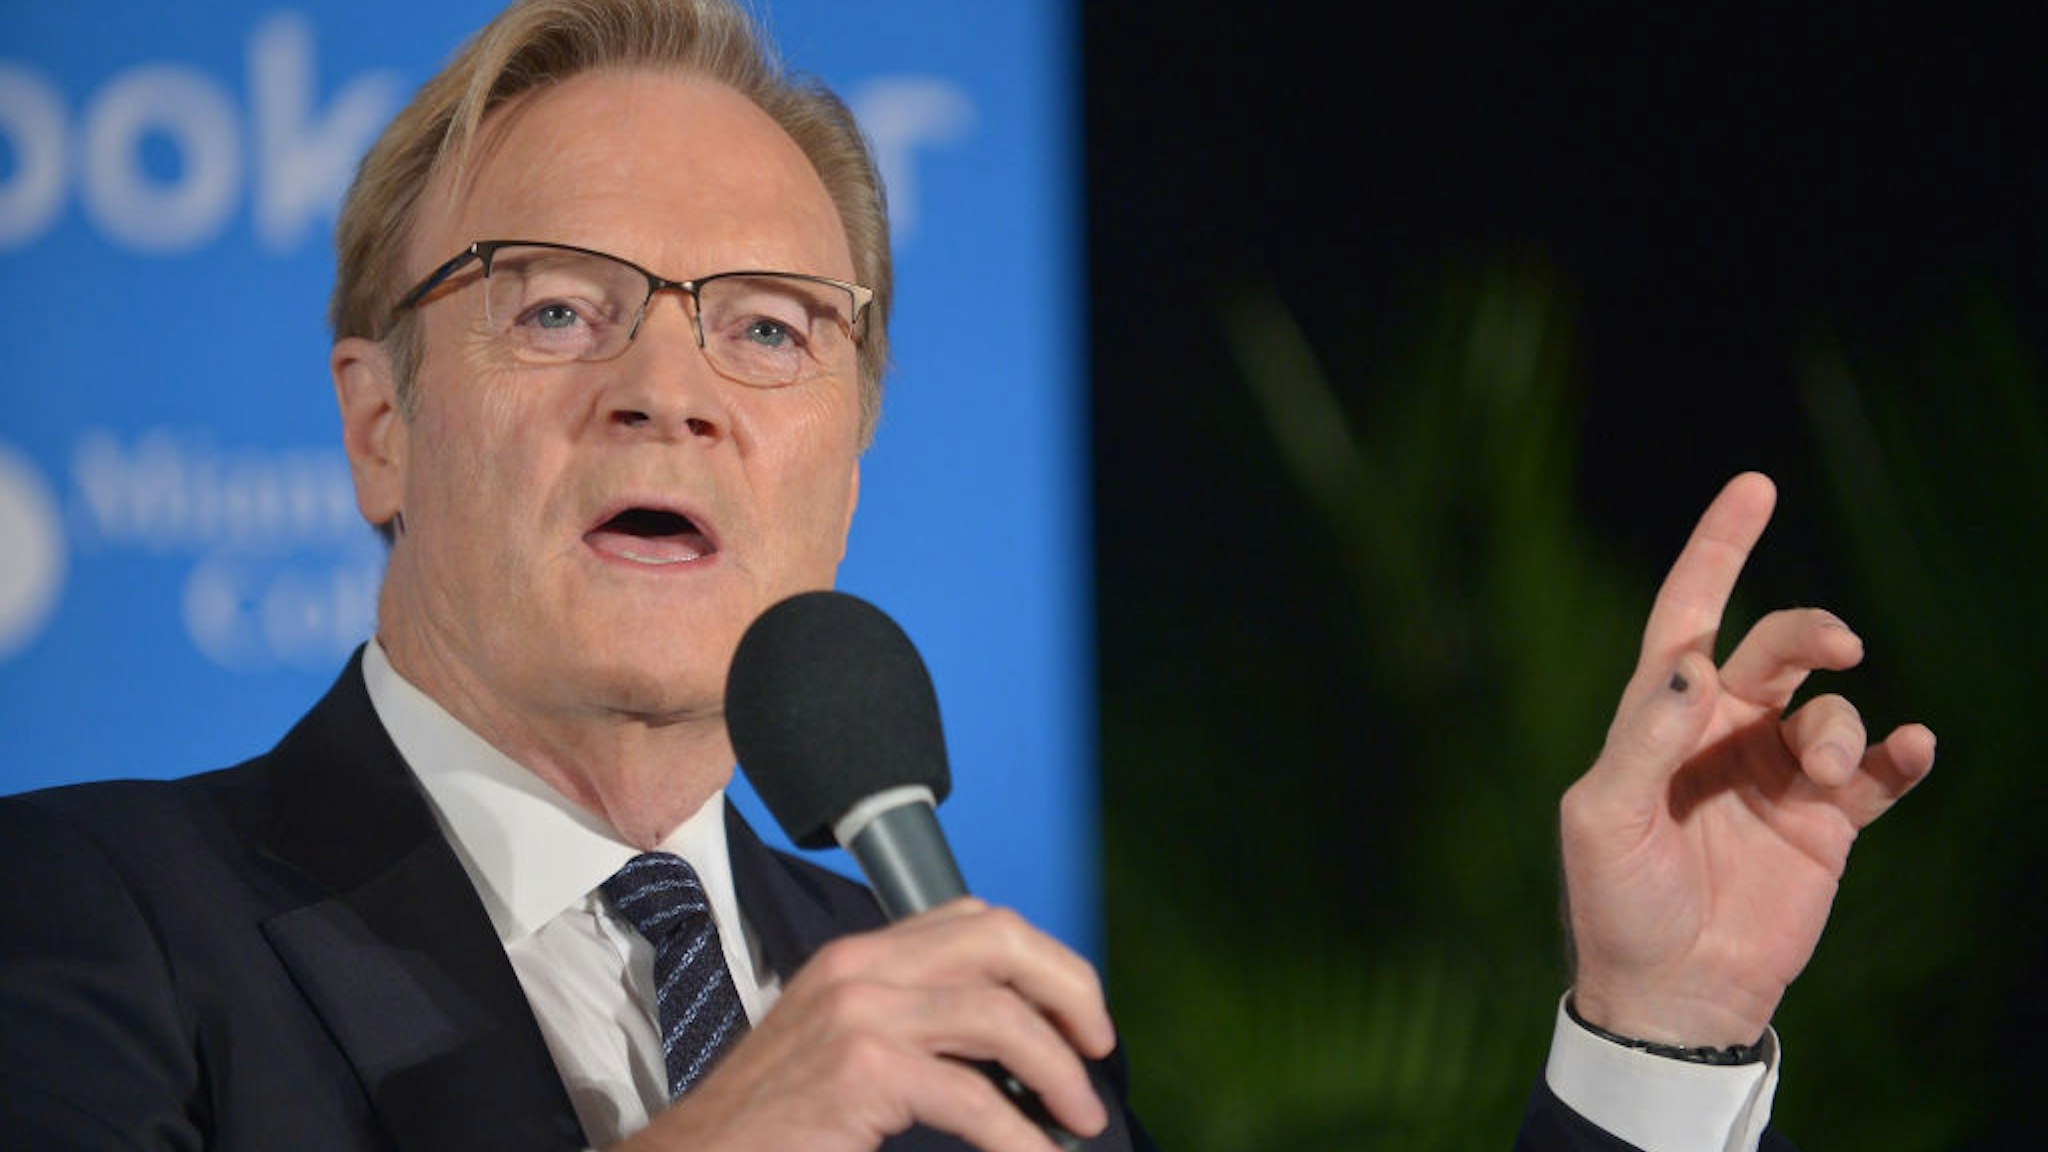 Host of The Last Word on MSNBC Lawrence O'Donnell attends The Miami Book Fair at Miami Dade College Wolfson - Chapman Conference Center on November 13, 2017 in Miami, Florida.